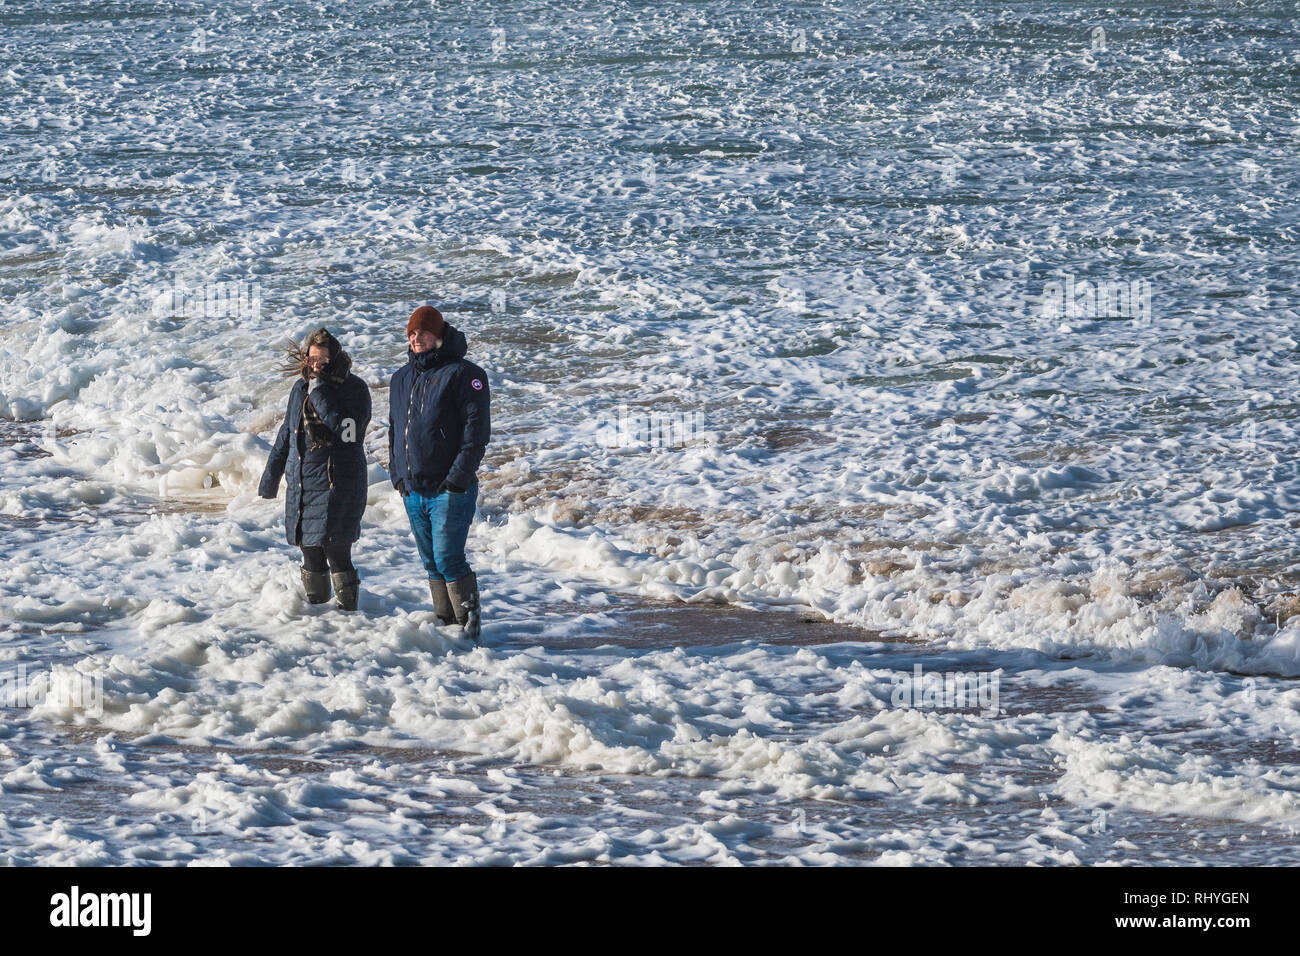 Two people standing in the sea with spume and foam flowing around them. Stock Photo